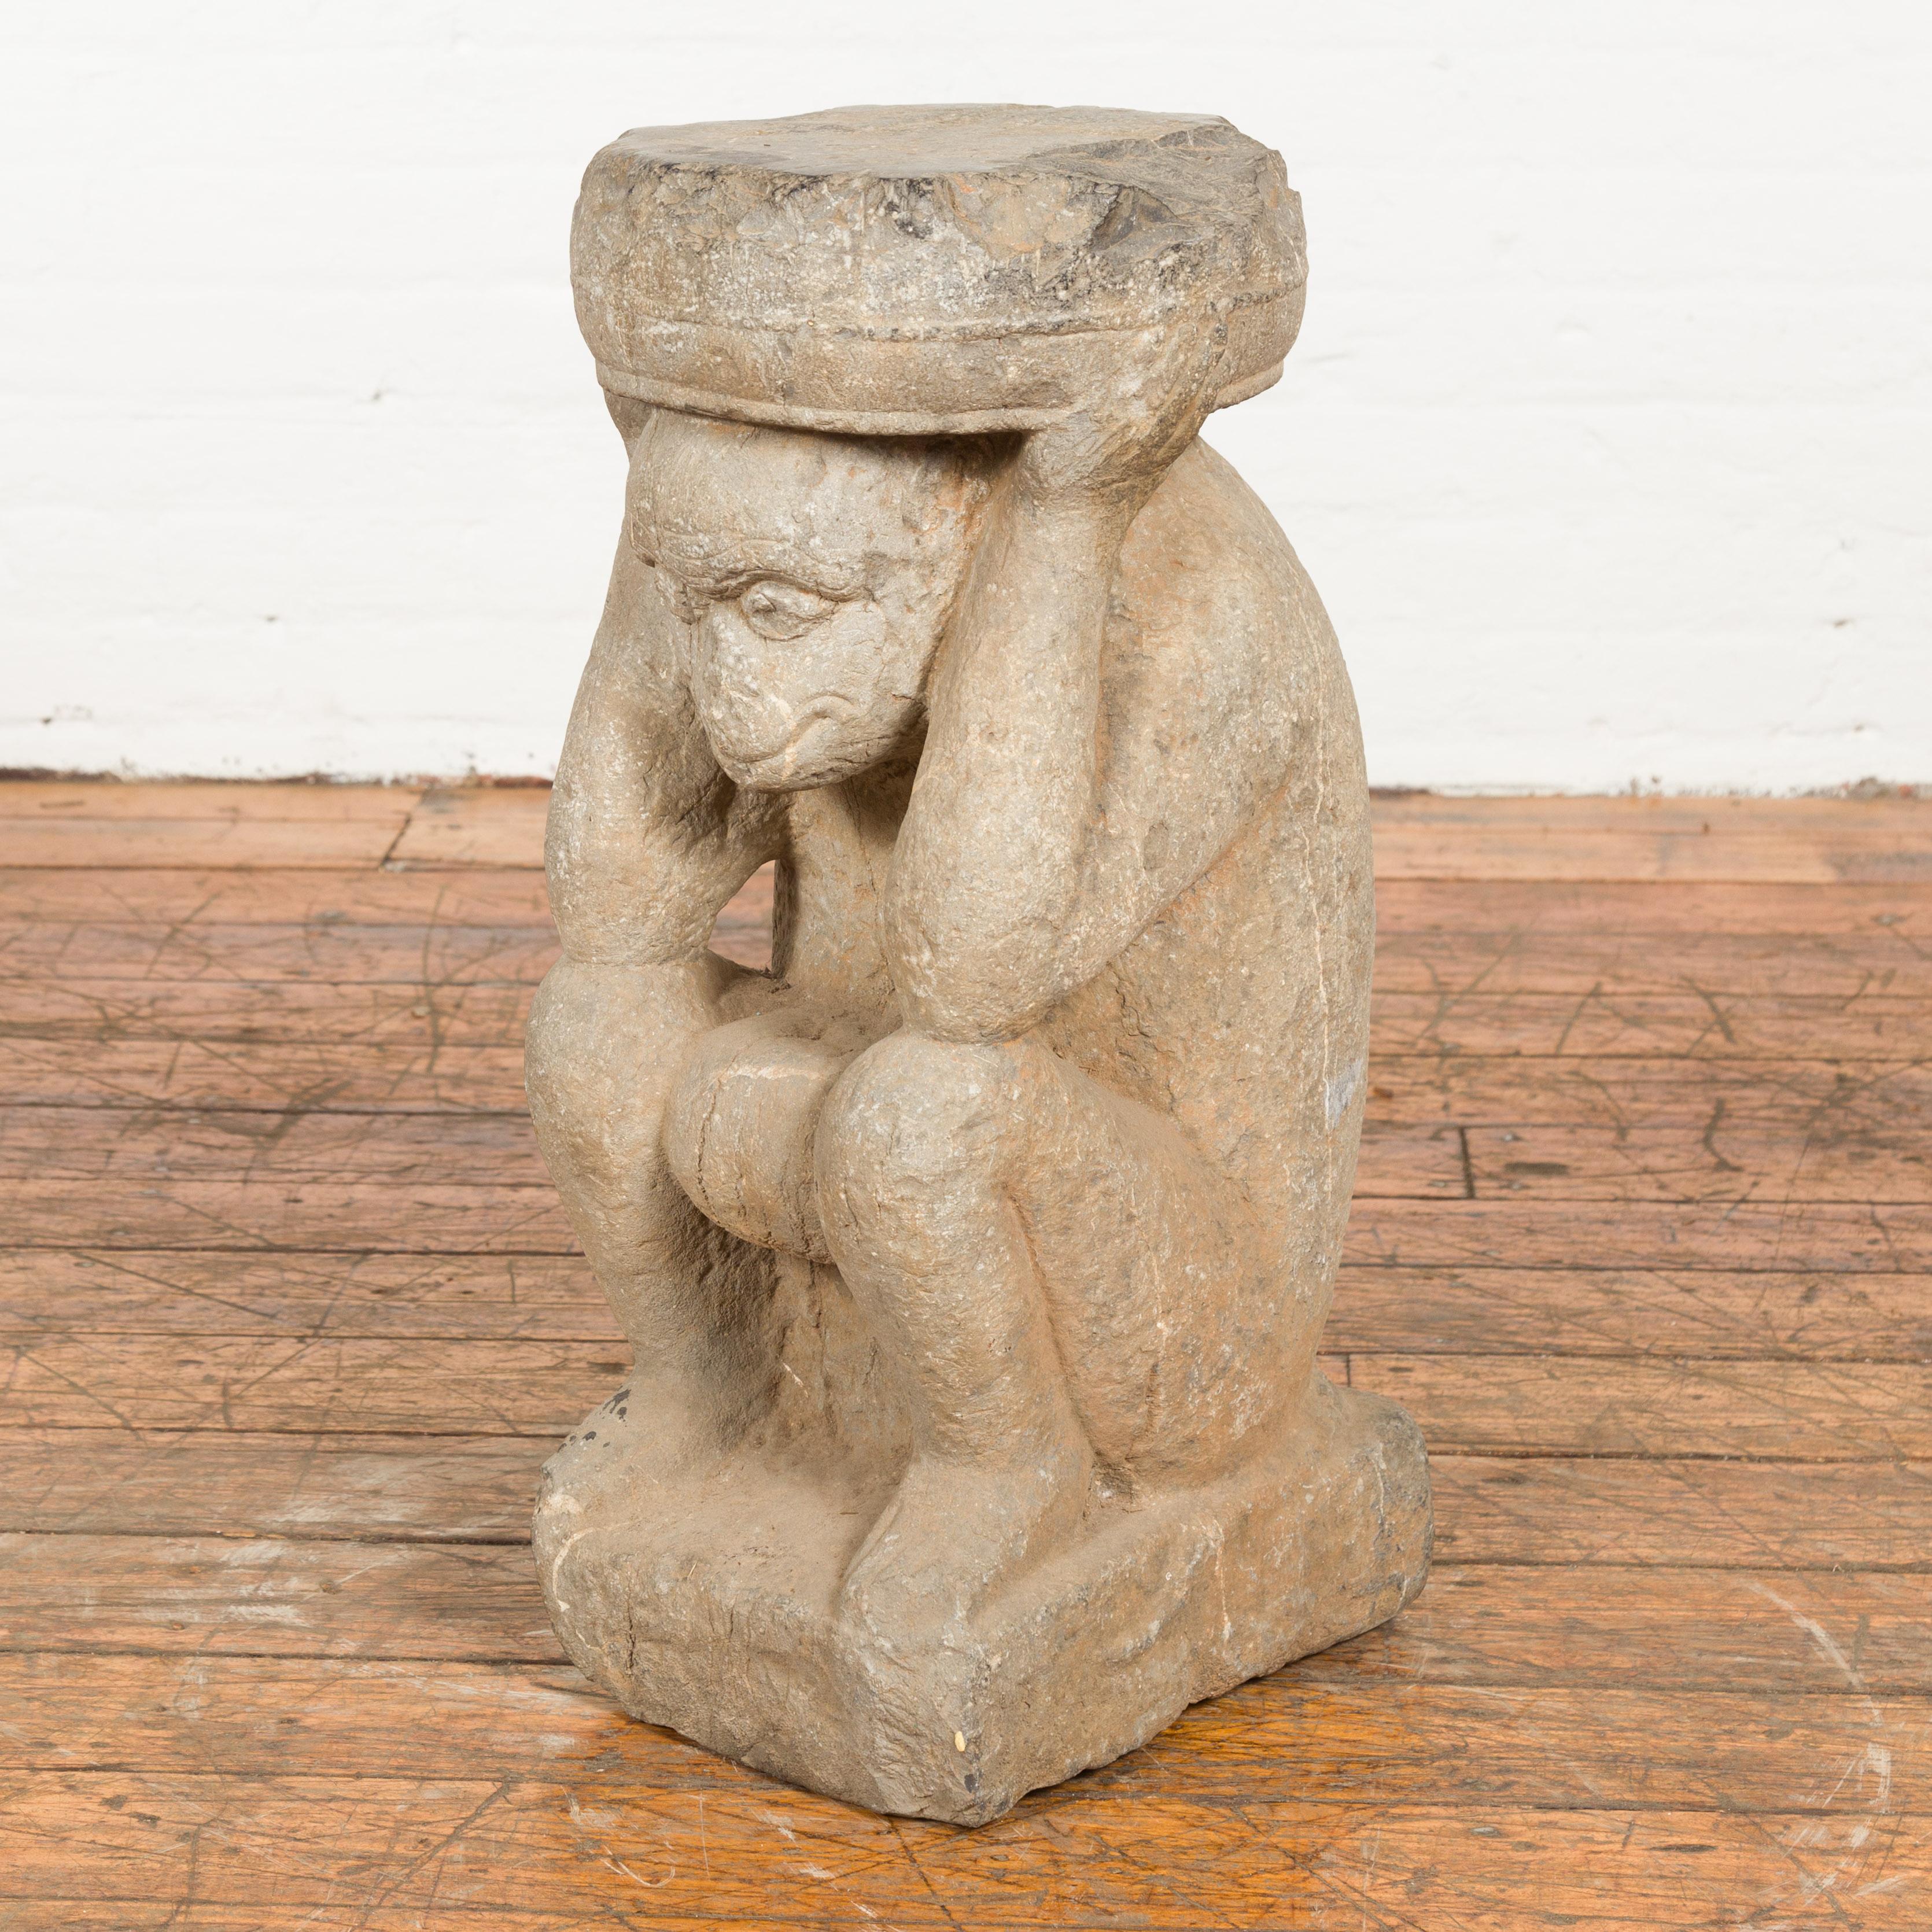 A Chinese Ming Dynasty period hand carved stone monkey temple sculpture from the 17th century, depicted seated and holding a round stone disc above its head. Created in China during the Ming Dynasty period which spanned from 1368 to 1644, this hand